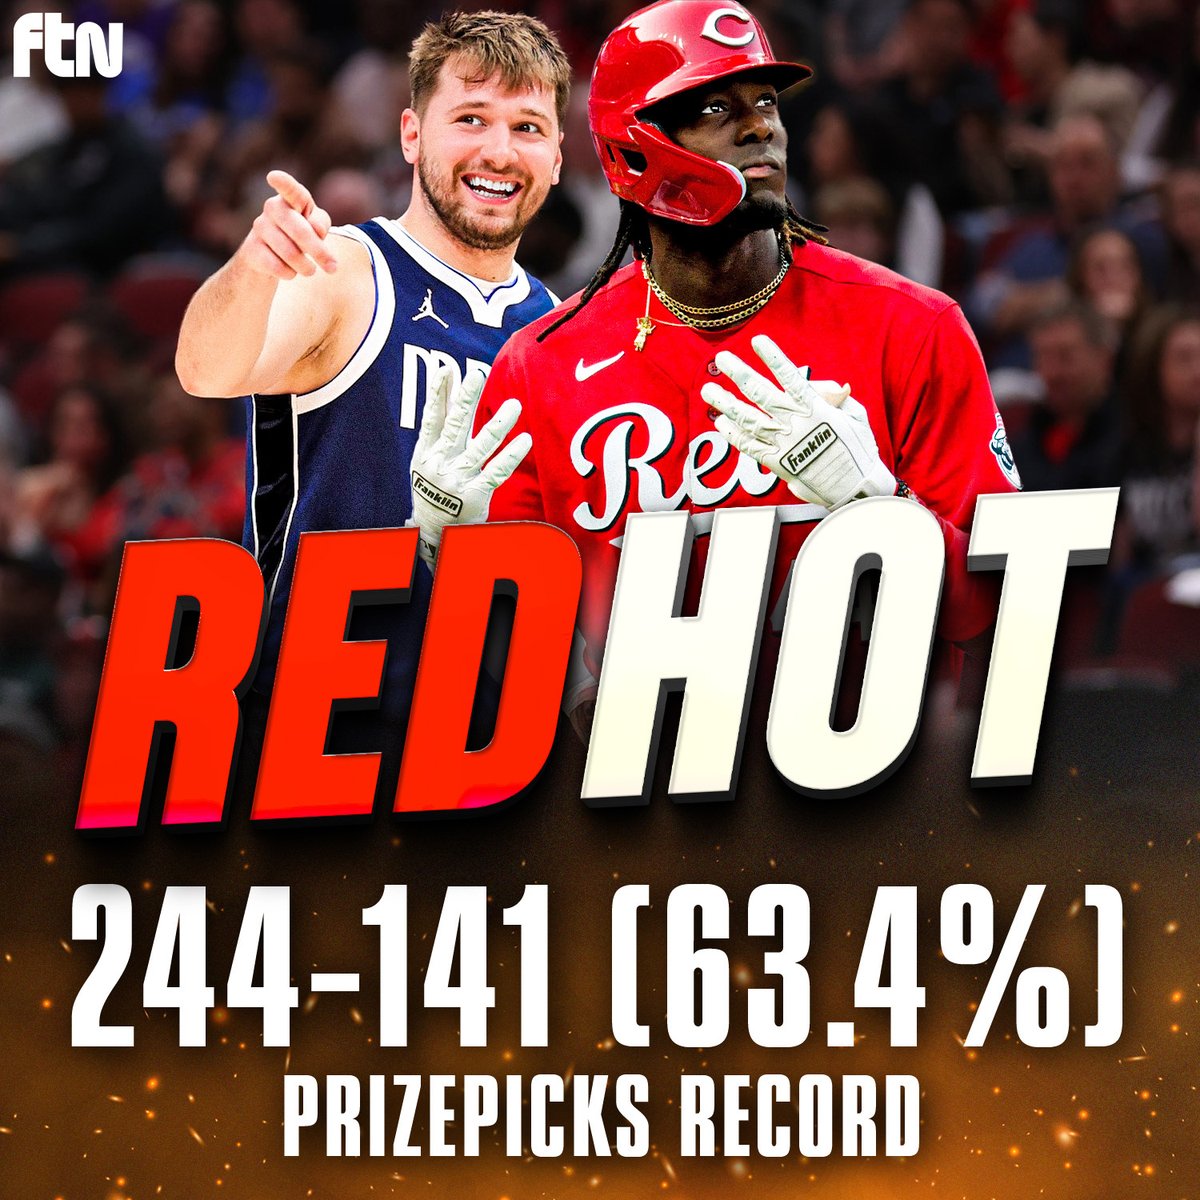 The @FTNFantasy Prizepicks tool is on 🔥 Check out @kawhisenbergDFS and @AlexBlickle1 breaking down the top plays daily from the Prizepicks tool: ftnfantasy.com/dfs/nba/prizep…